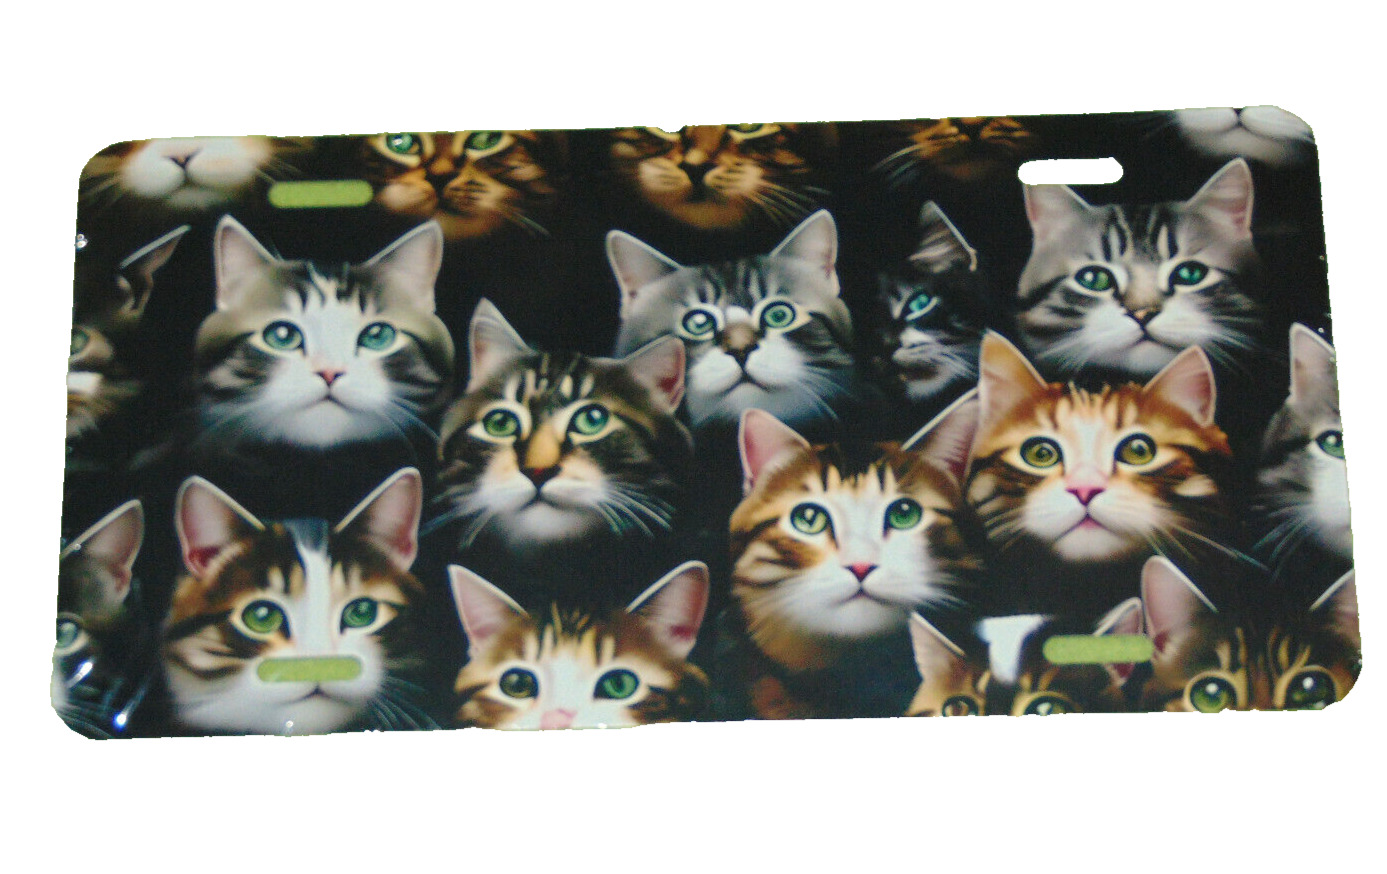 Clowder Of Cats License Plate 6 X 12 Inches Aluminum New